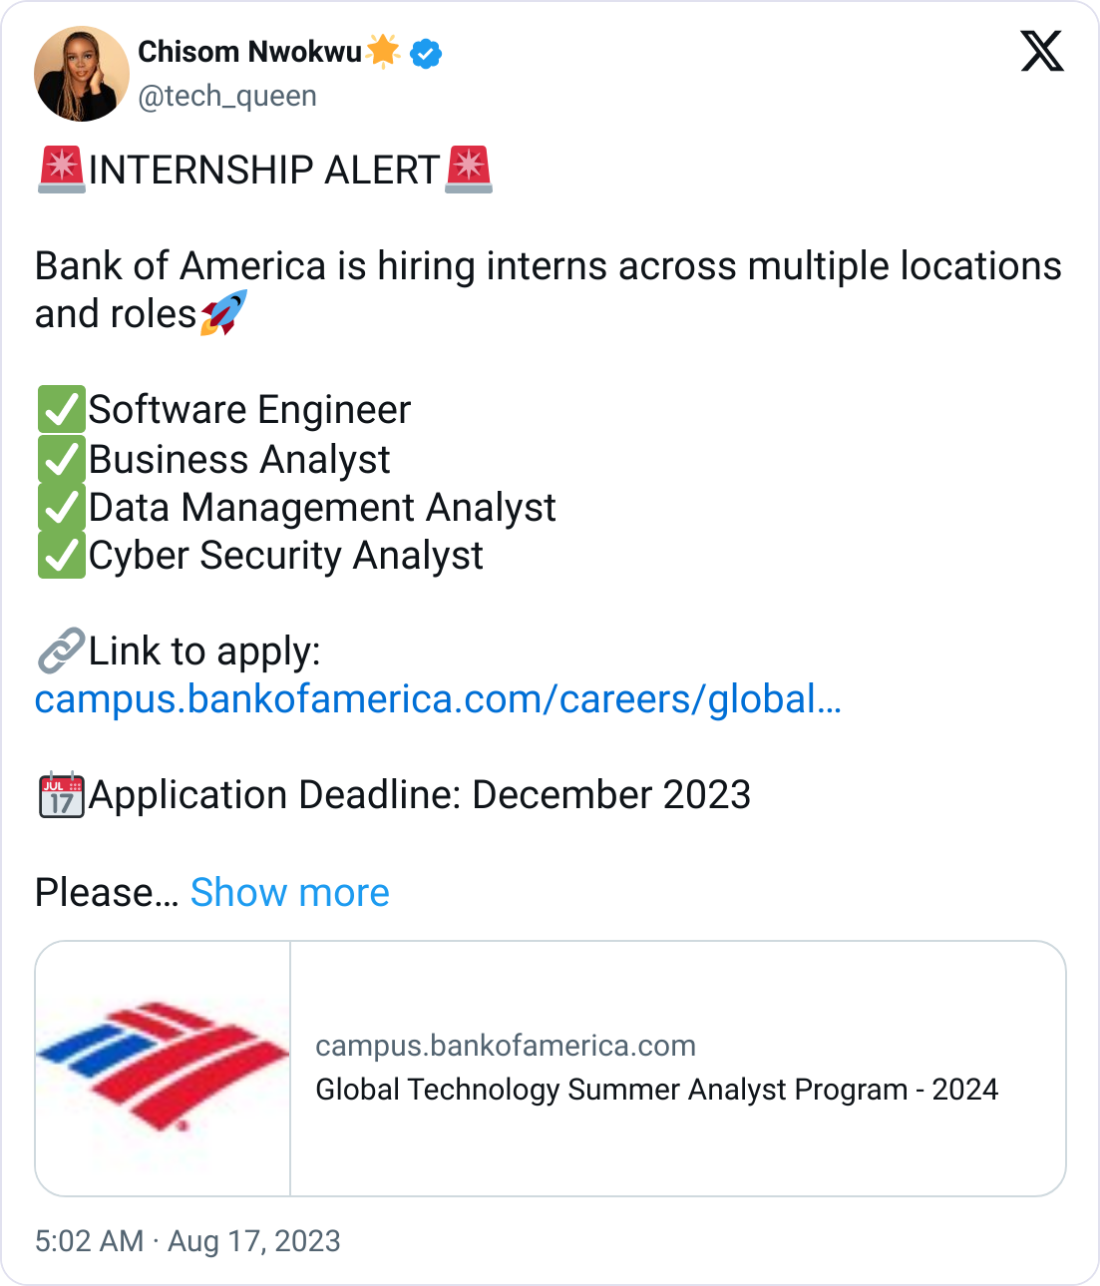 Chisom Nwokwu🌟 @tech_queen 🚨INTERNSHIP ALERT🚨  Bank of America is hiring interns across multiple locations and roles🚀  ✅Software Engineer ✅Business Analyst ✅Data Management Analyst ✅Cyber Security Analyst  🔗Link to apply: https://campus.bankofamerica.com/careers/global_technology_summer_analyst_program__2024.html  📆Application Deadline: December 2023  Please like👍, and share🔃with someone who needs this🫶  📌Pursuing an undergraduate Bachelor’s Degree (BA/BS/BSc/BEng) 📌Graduation timeframe must fall between December 2024 and June 2025 📌Major/Course of Study: Computer Science, Computer Engineering, Information Systems, Data Science, or similar degree of relevance 📌GPA: 3.2 minimum GPA preferred